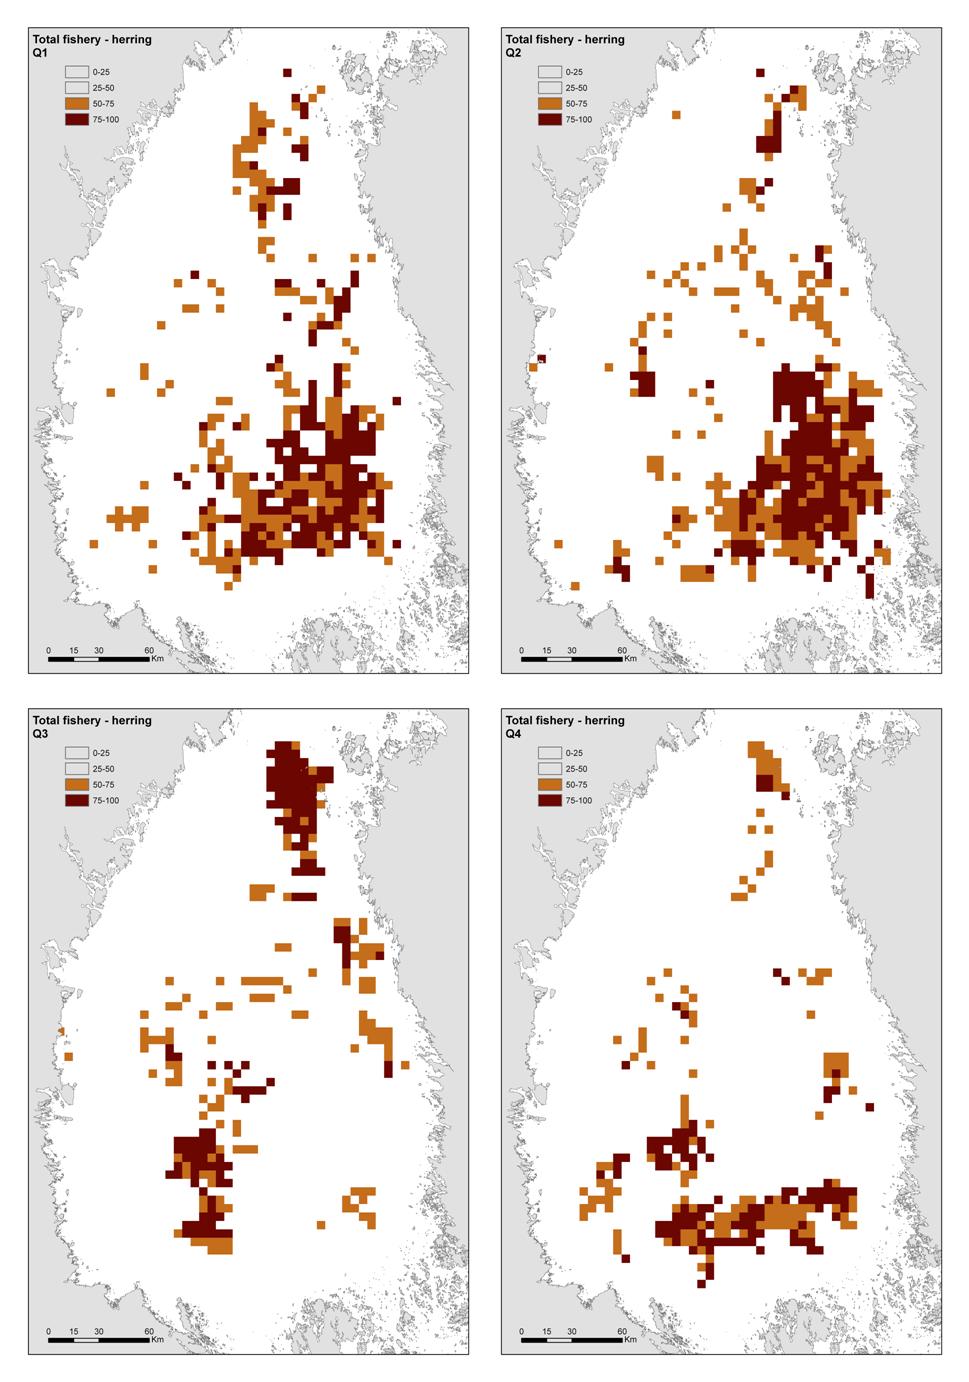 Figure 5. Seasonal pattern of the commercial herring fishery in the Bothnian Sea by quarter of a year.